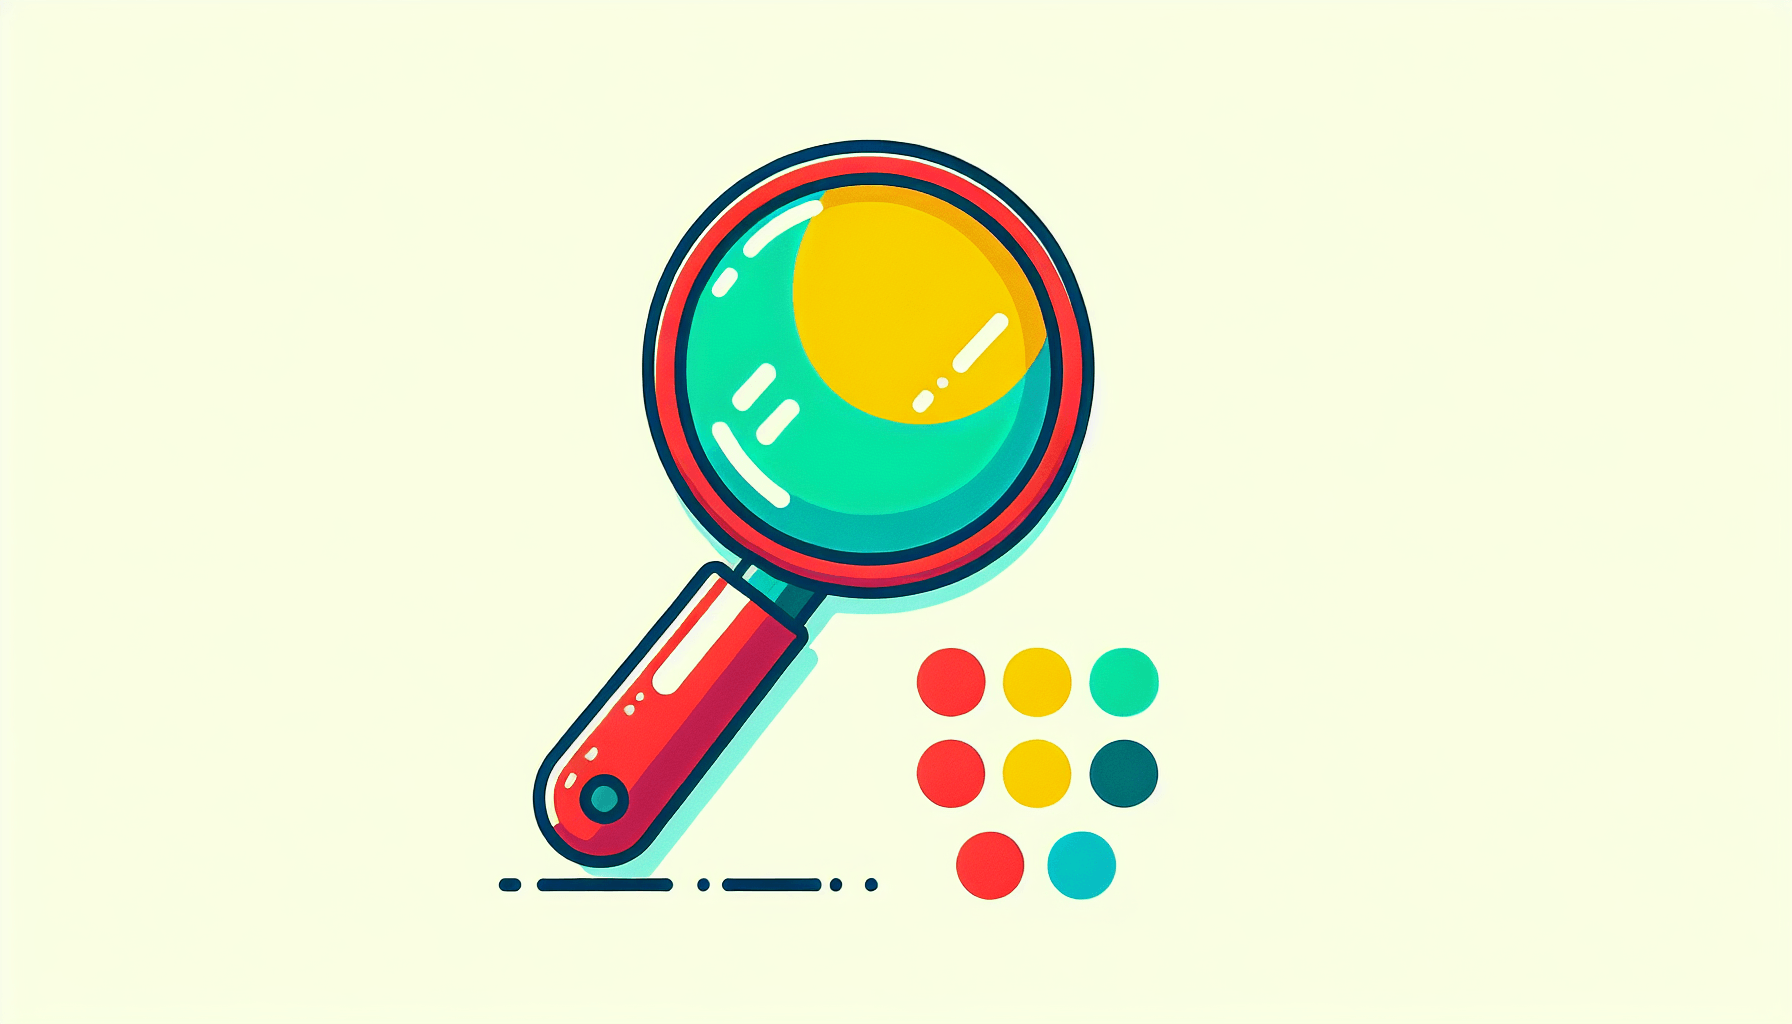 Magnifying glass in flat illustration style and white background, red #f47574, green #88c7a8, yellow #fcc44b, and blue #645bc8 colors.